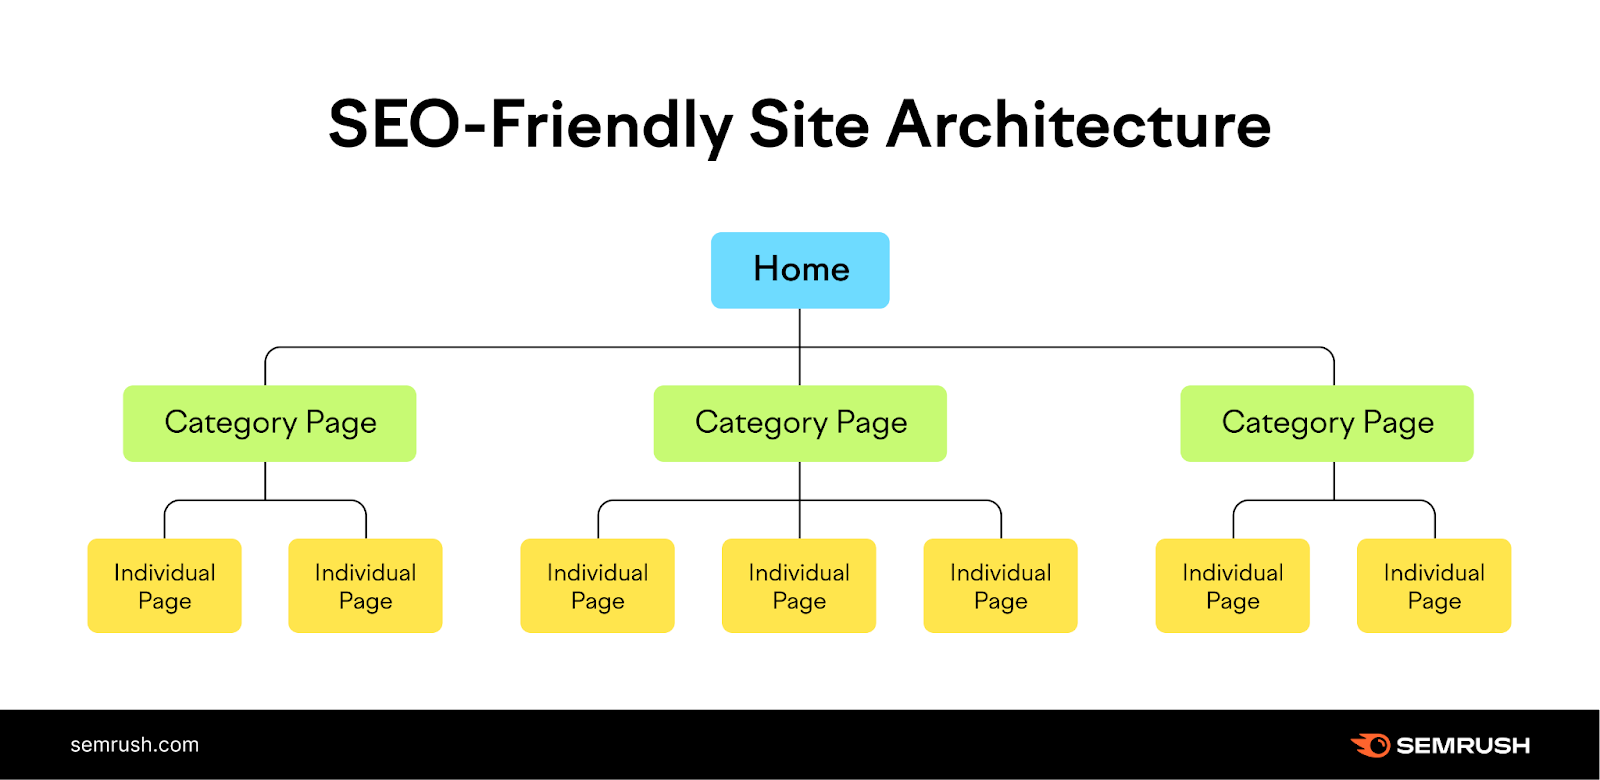 an illustration showing SEO-friendly site architecture